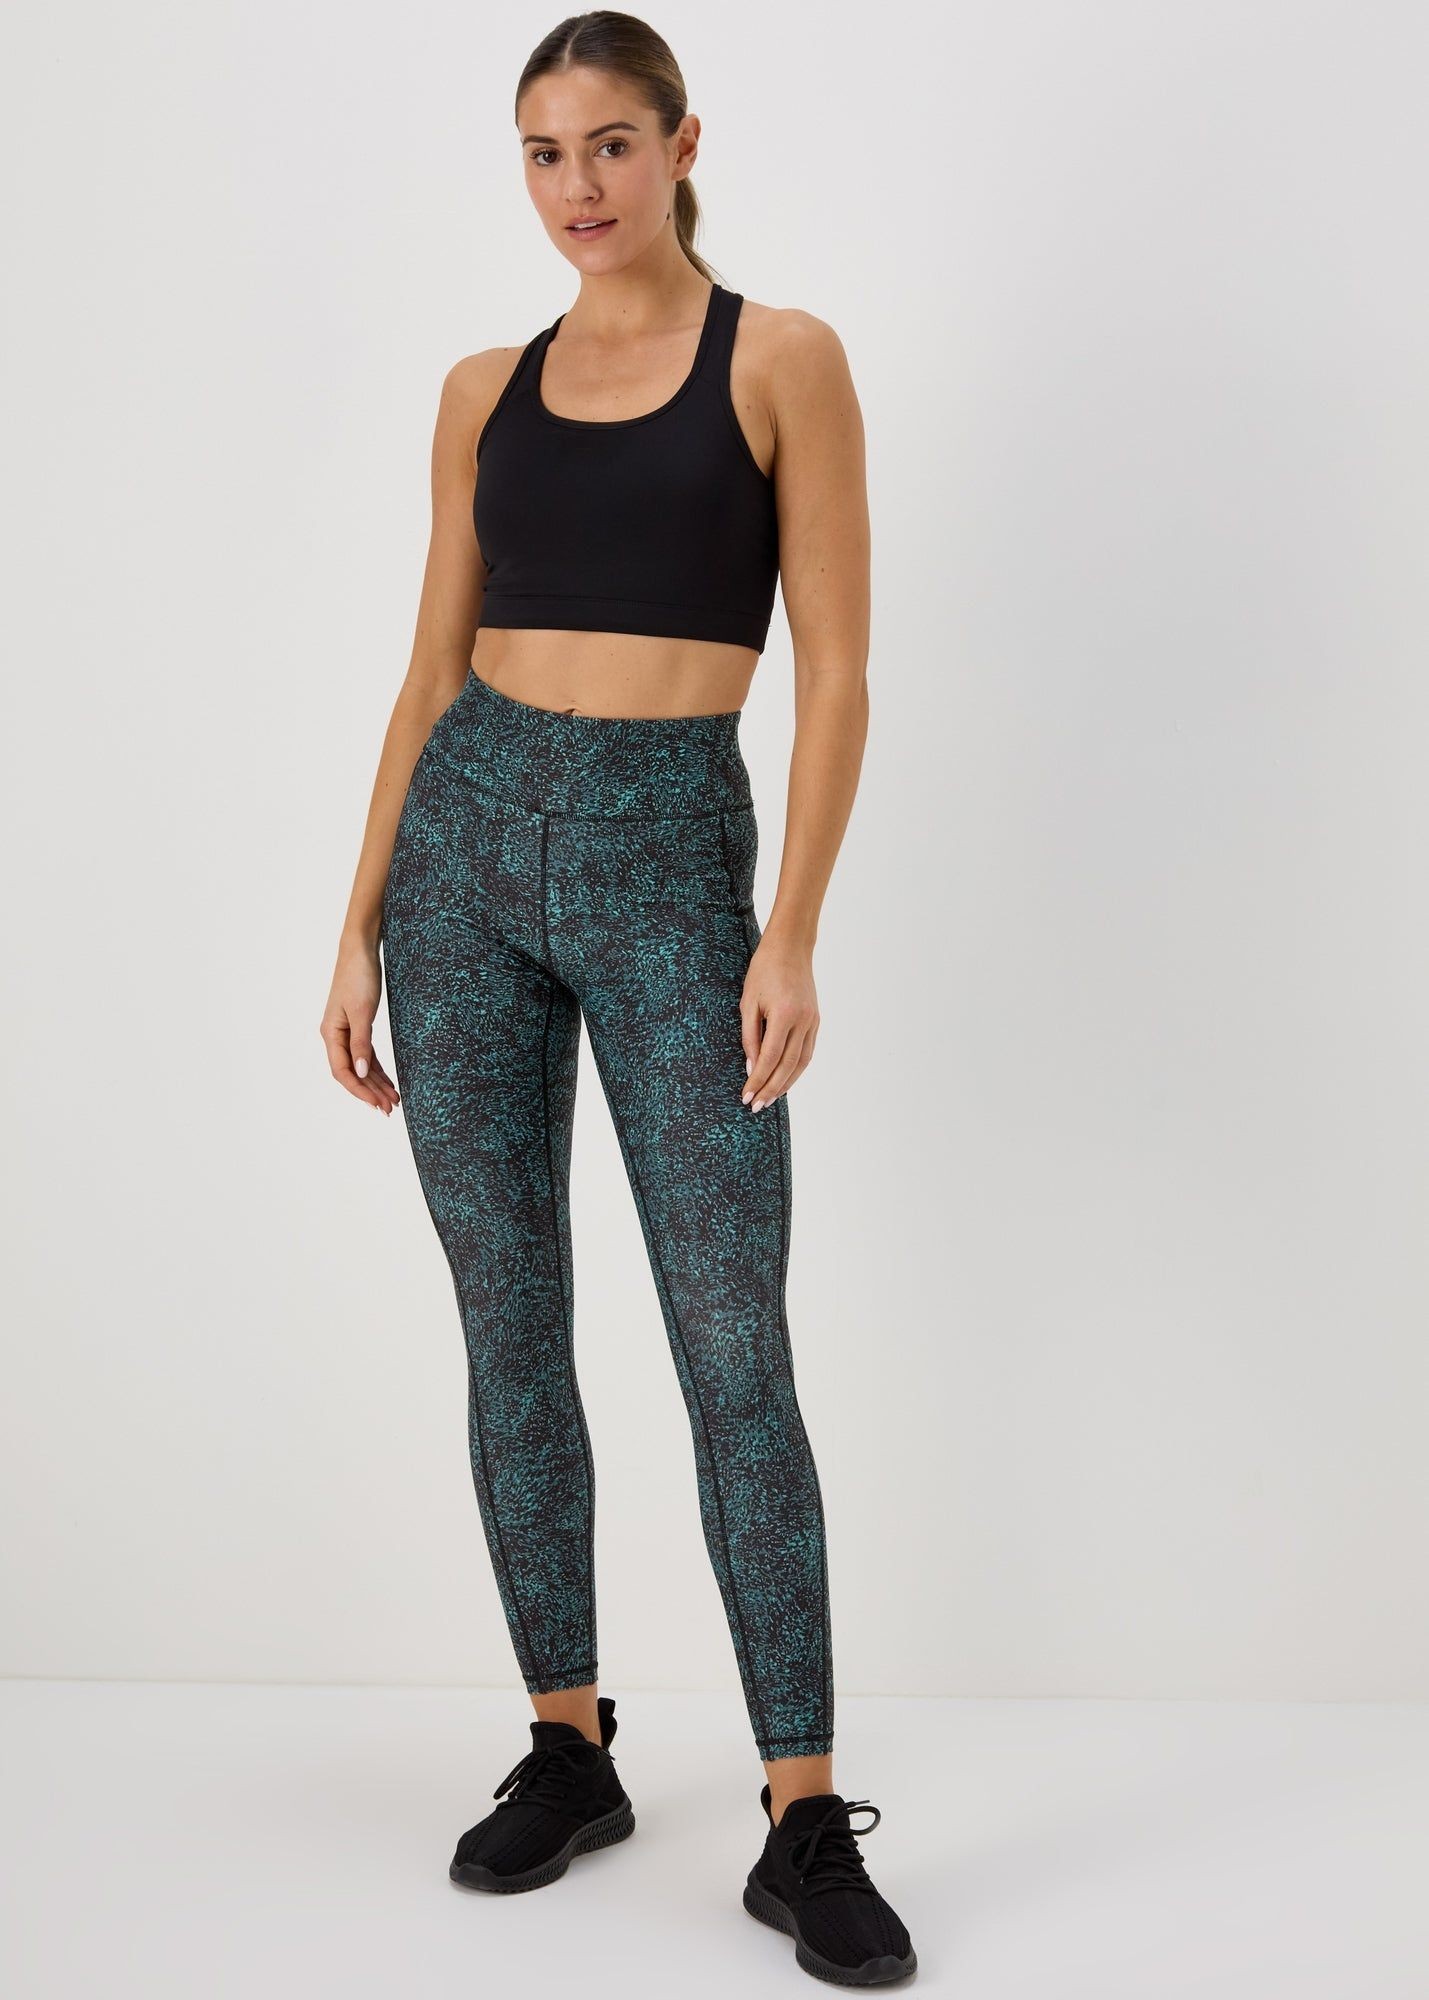 Buy Matalan Women's Sports Bottoms at Lowest Price in UAE